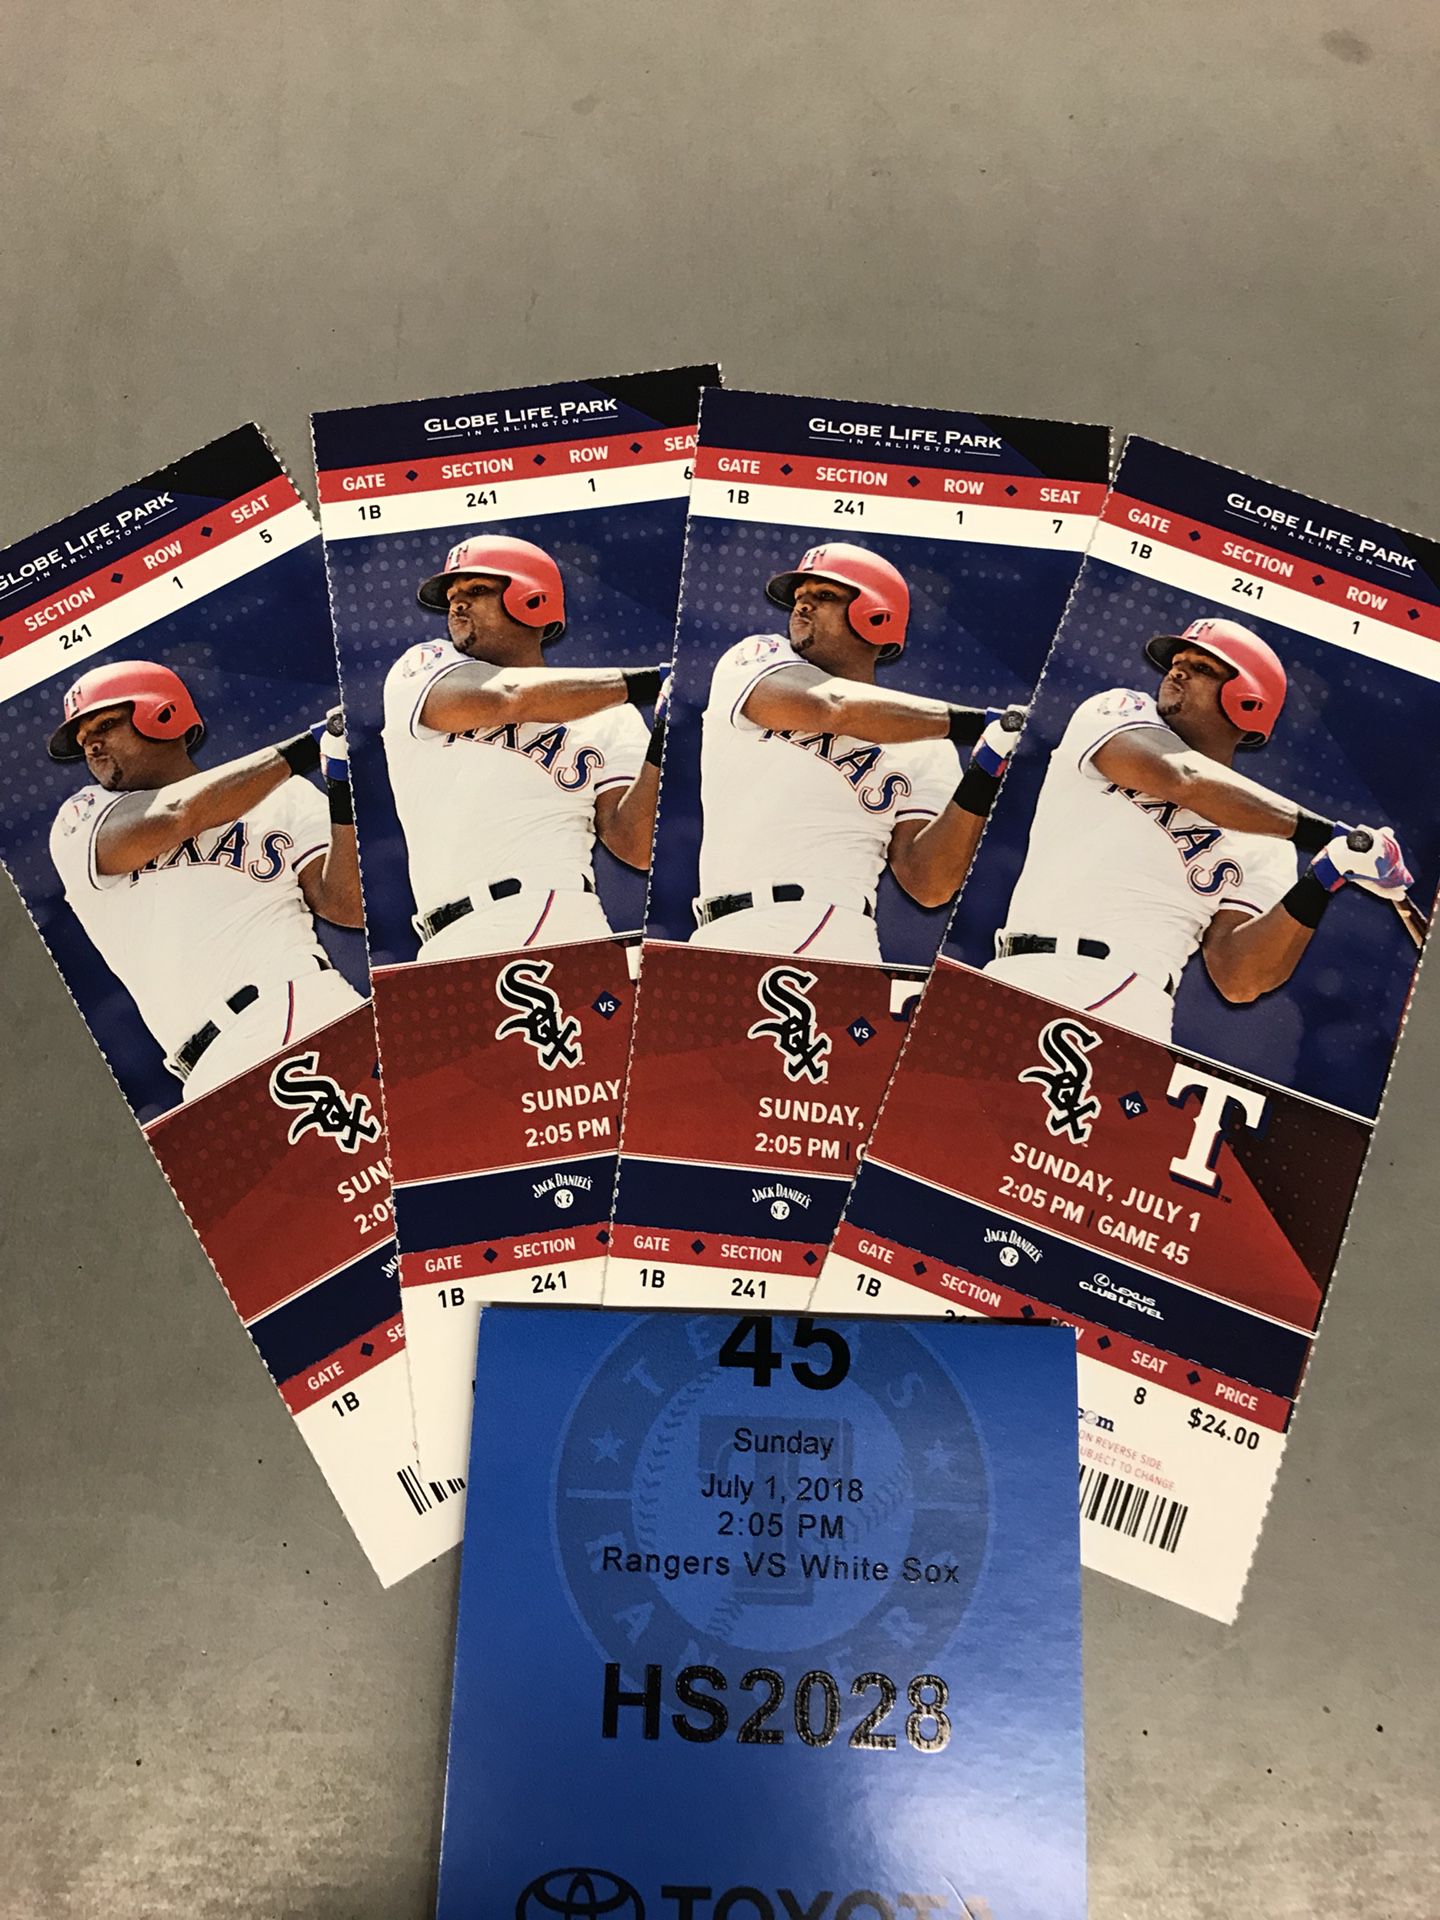 (4) Texas Rangers Tickets For Sunday July 1st. With Parking Pass.